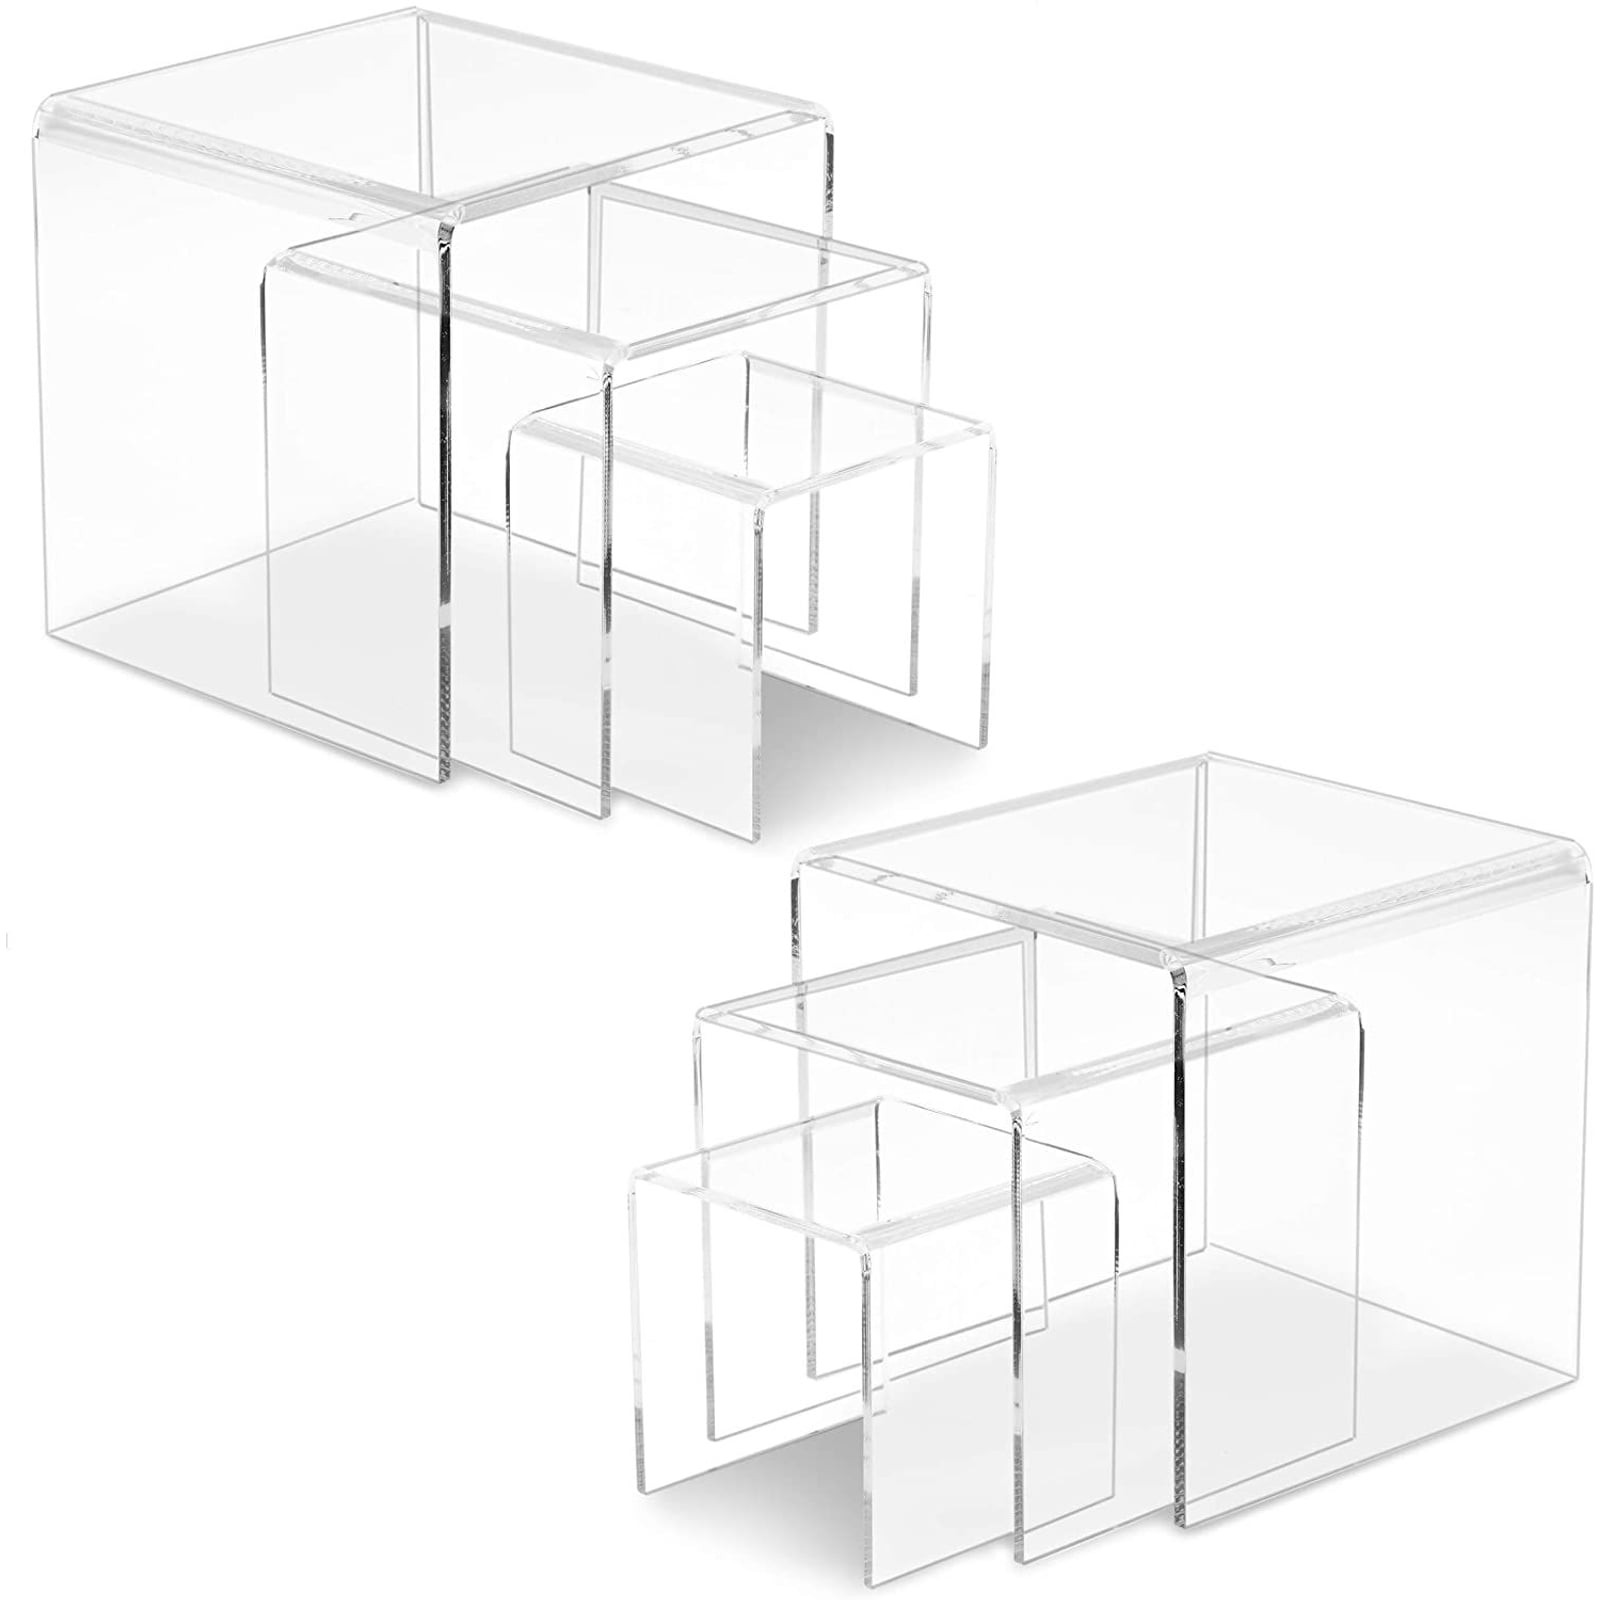 2 Sets Clear Acrylic Display Risers Jewelry Display Shelf Showcase Fixtures 6pcs for sale online 